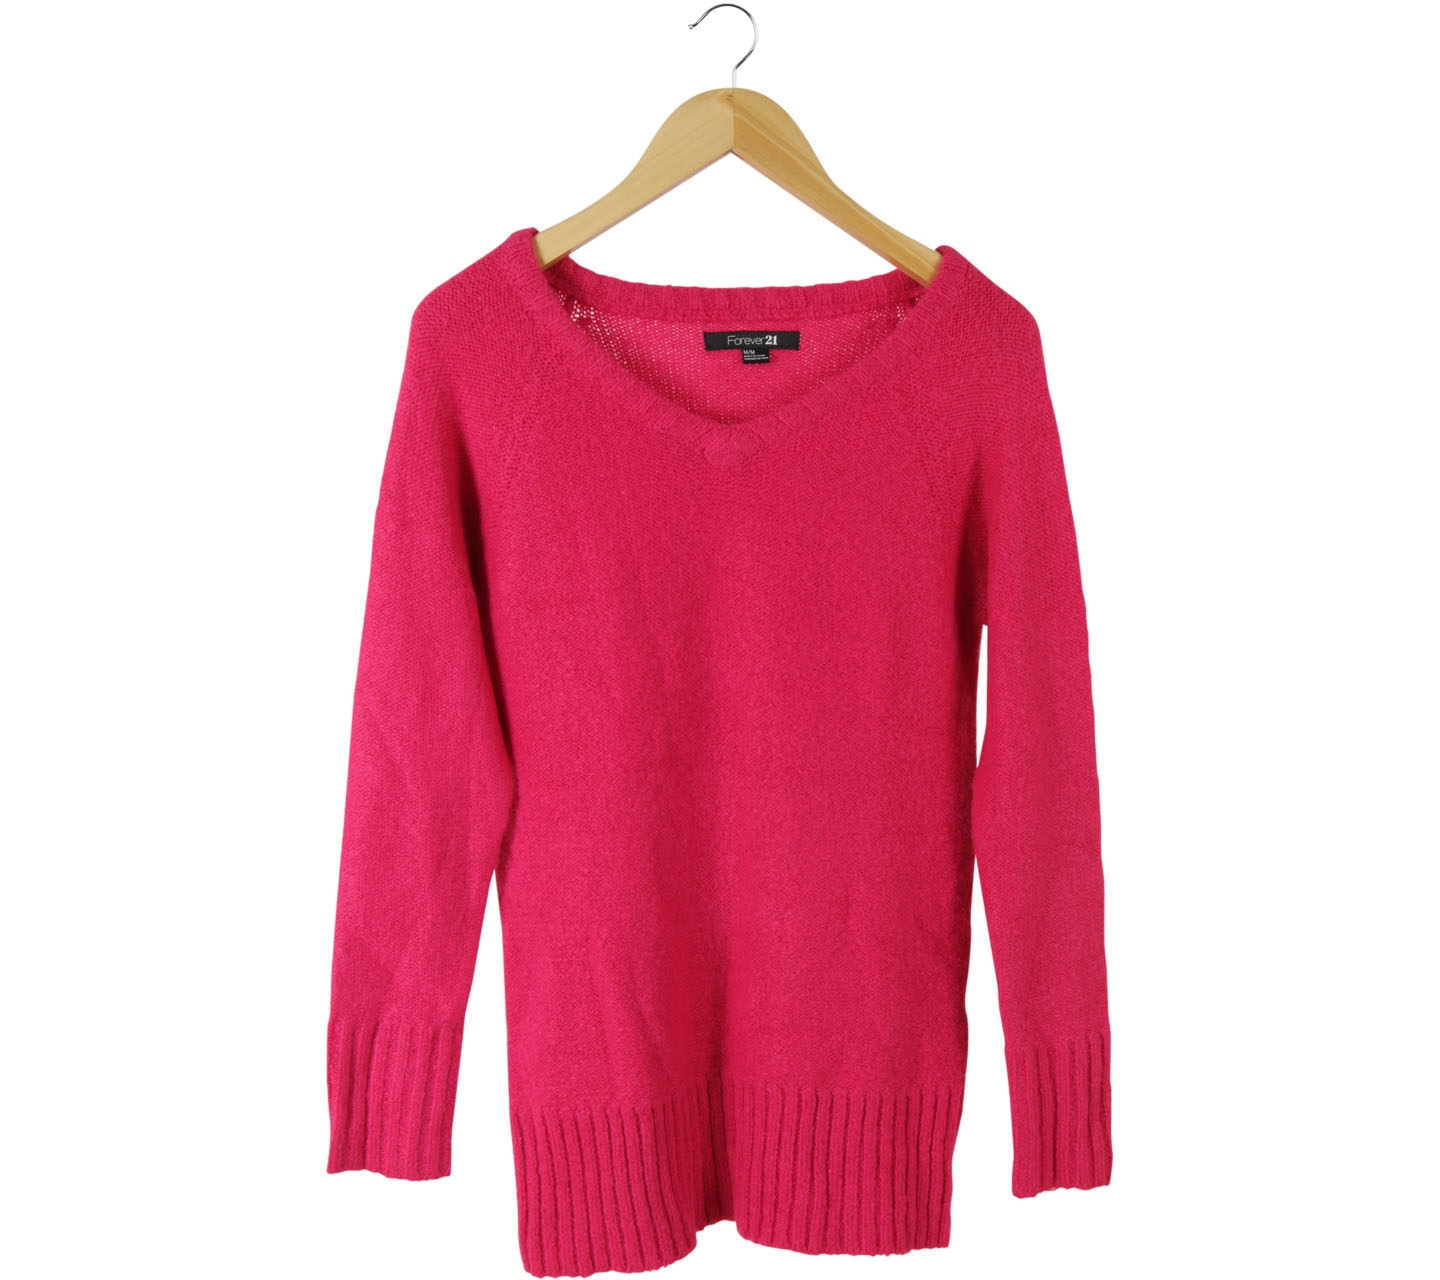 Forever 21 Pink Knit Sweater